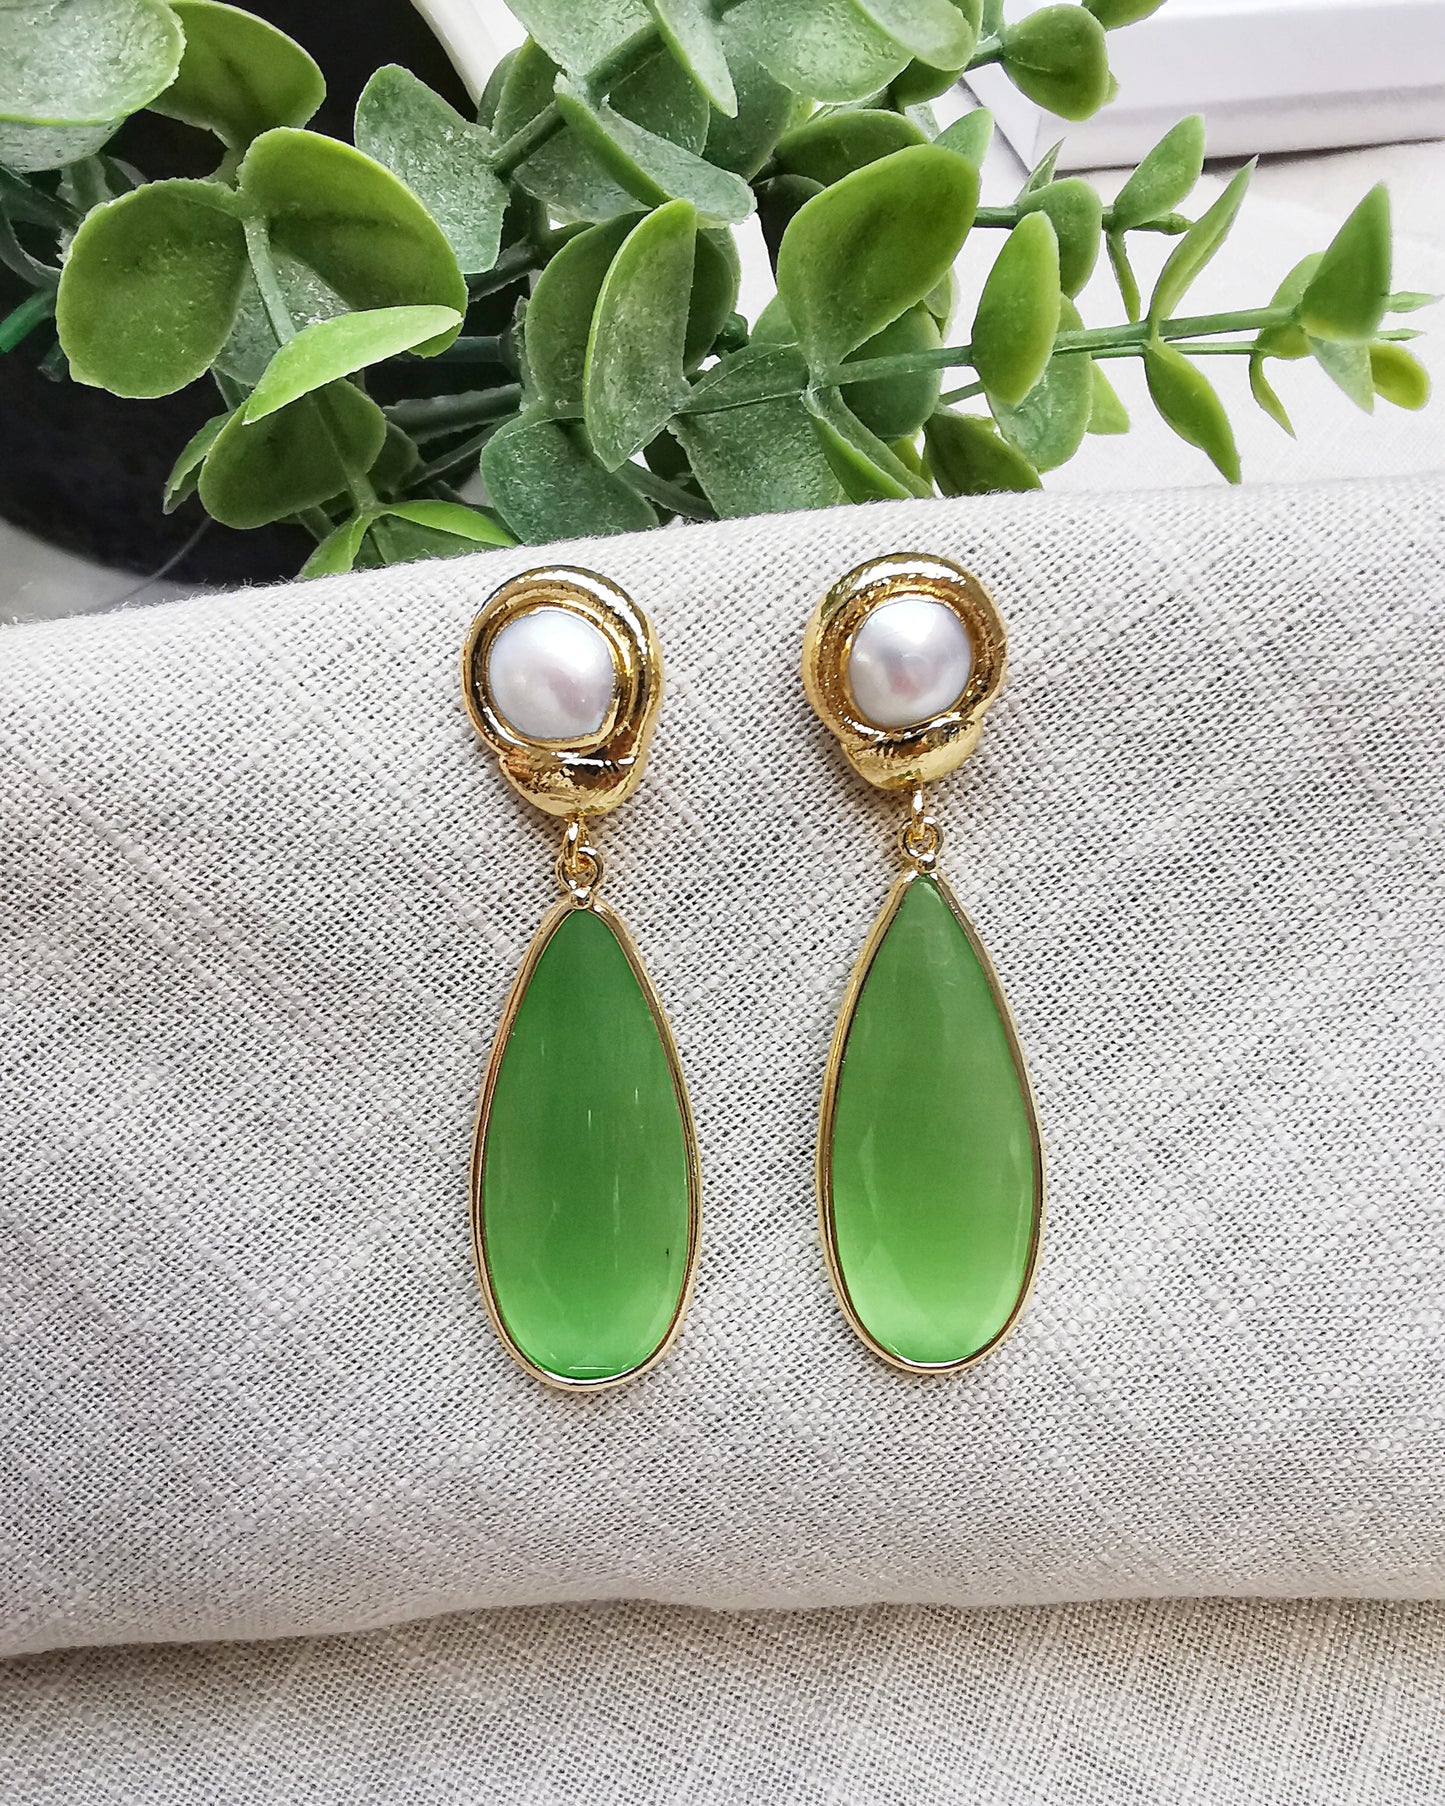 Apple Green Monalisa Statement Earrings with Freshwater Pearls - LIMITED EDITION